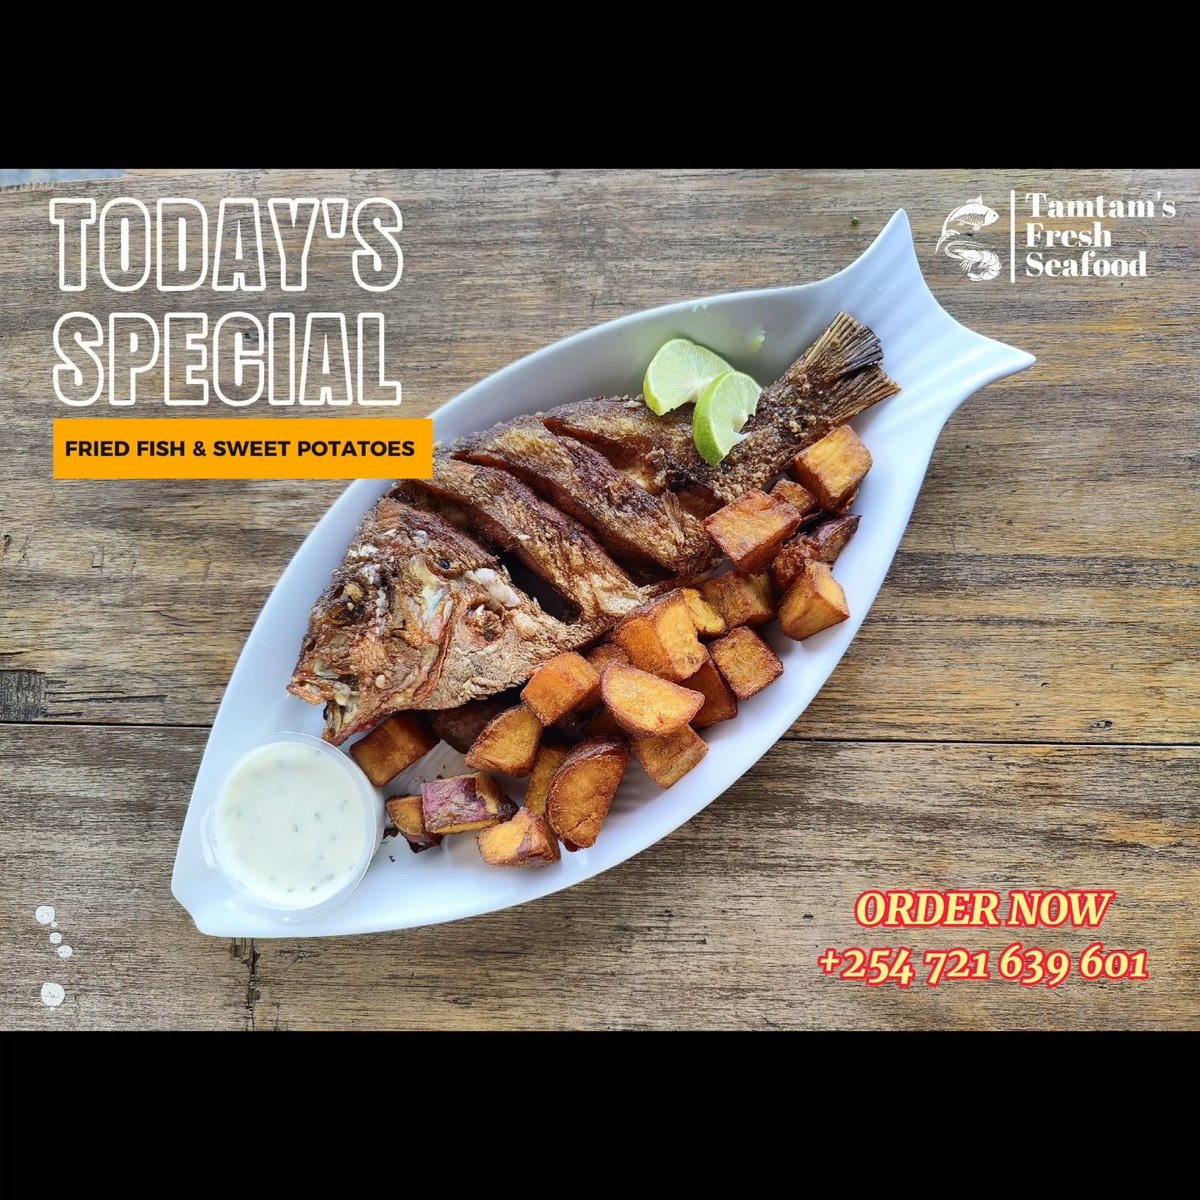 Today's Special is Freshly Fried ,Marinated, Fish of the day with Sweet Potato Wedges served with Tarter Sauce at Kes 650 Only. 🔹Fish Options: Whole Tilapia,Whole Mackerel or Nile Perch Steaks FREE DELIVERY within South B #lunchisserved #fishjoint #NationalGirlfriendday